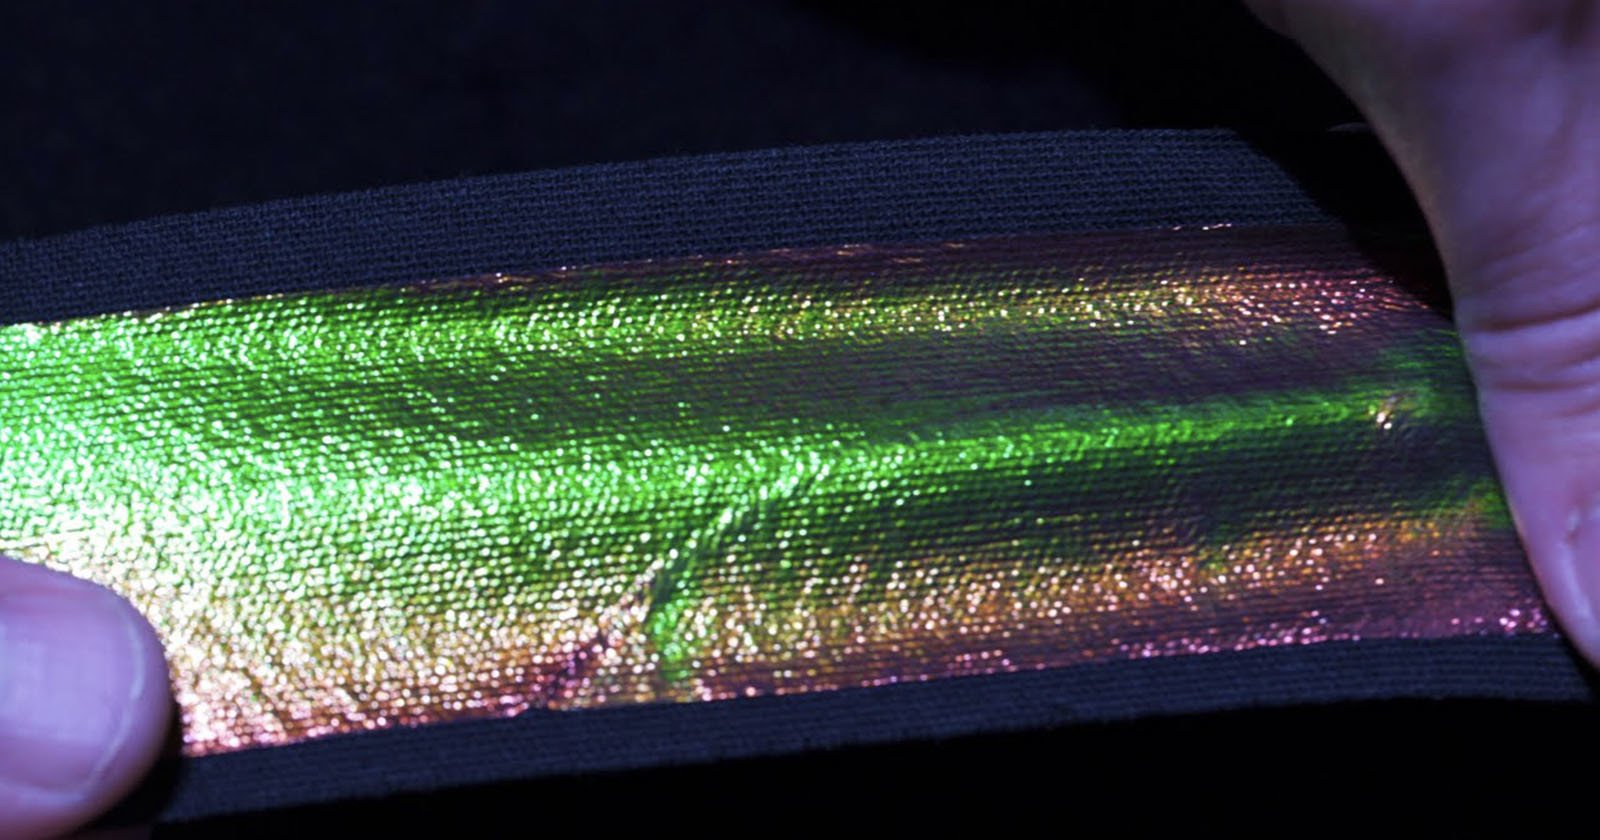  mit use 19th-century photography tech create chameleon material 